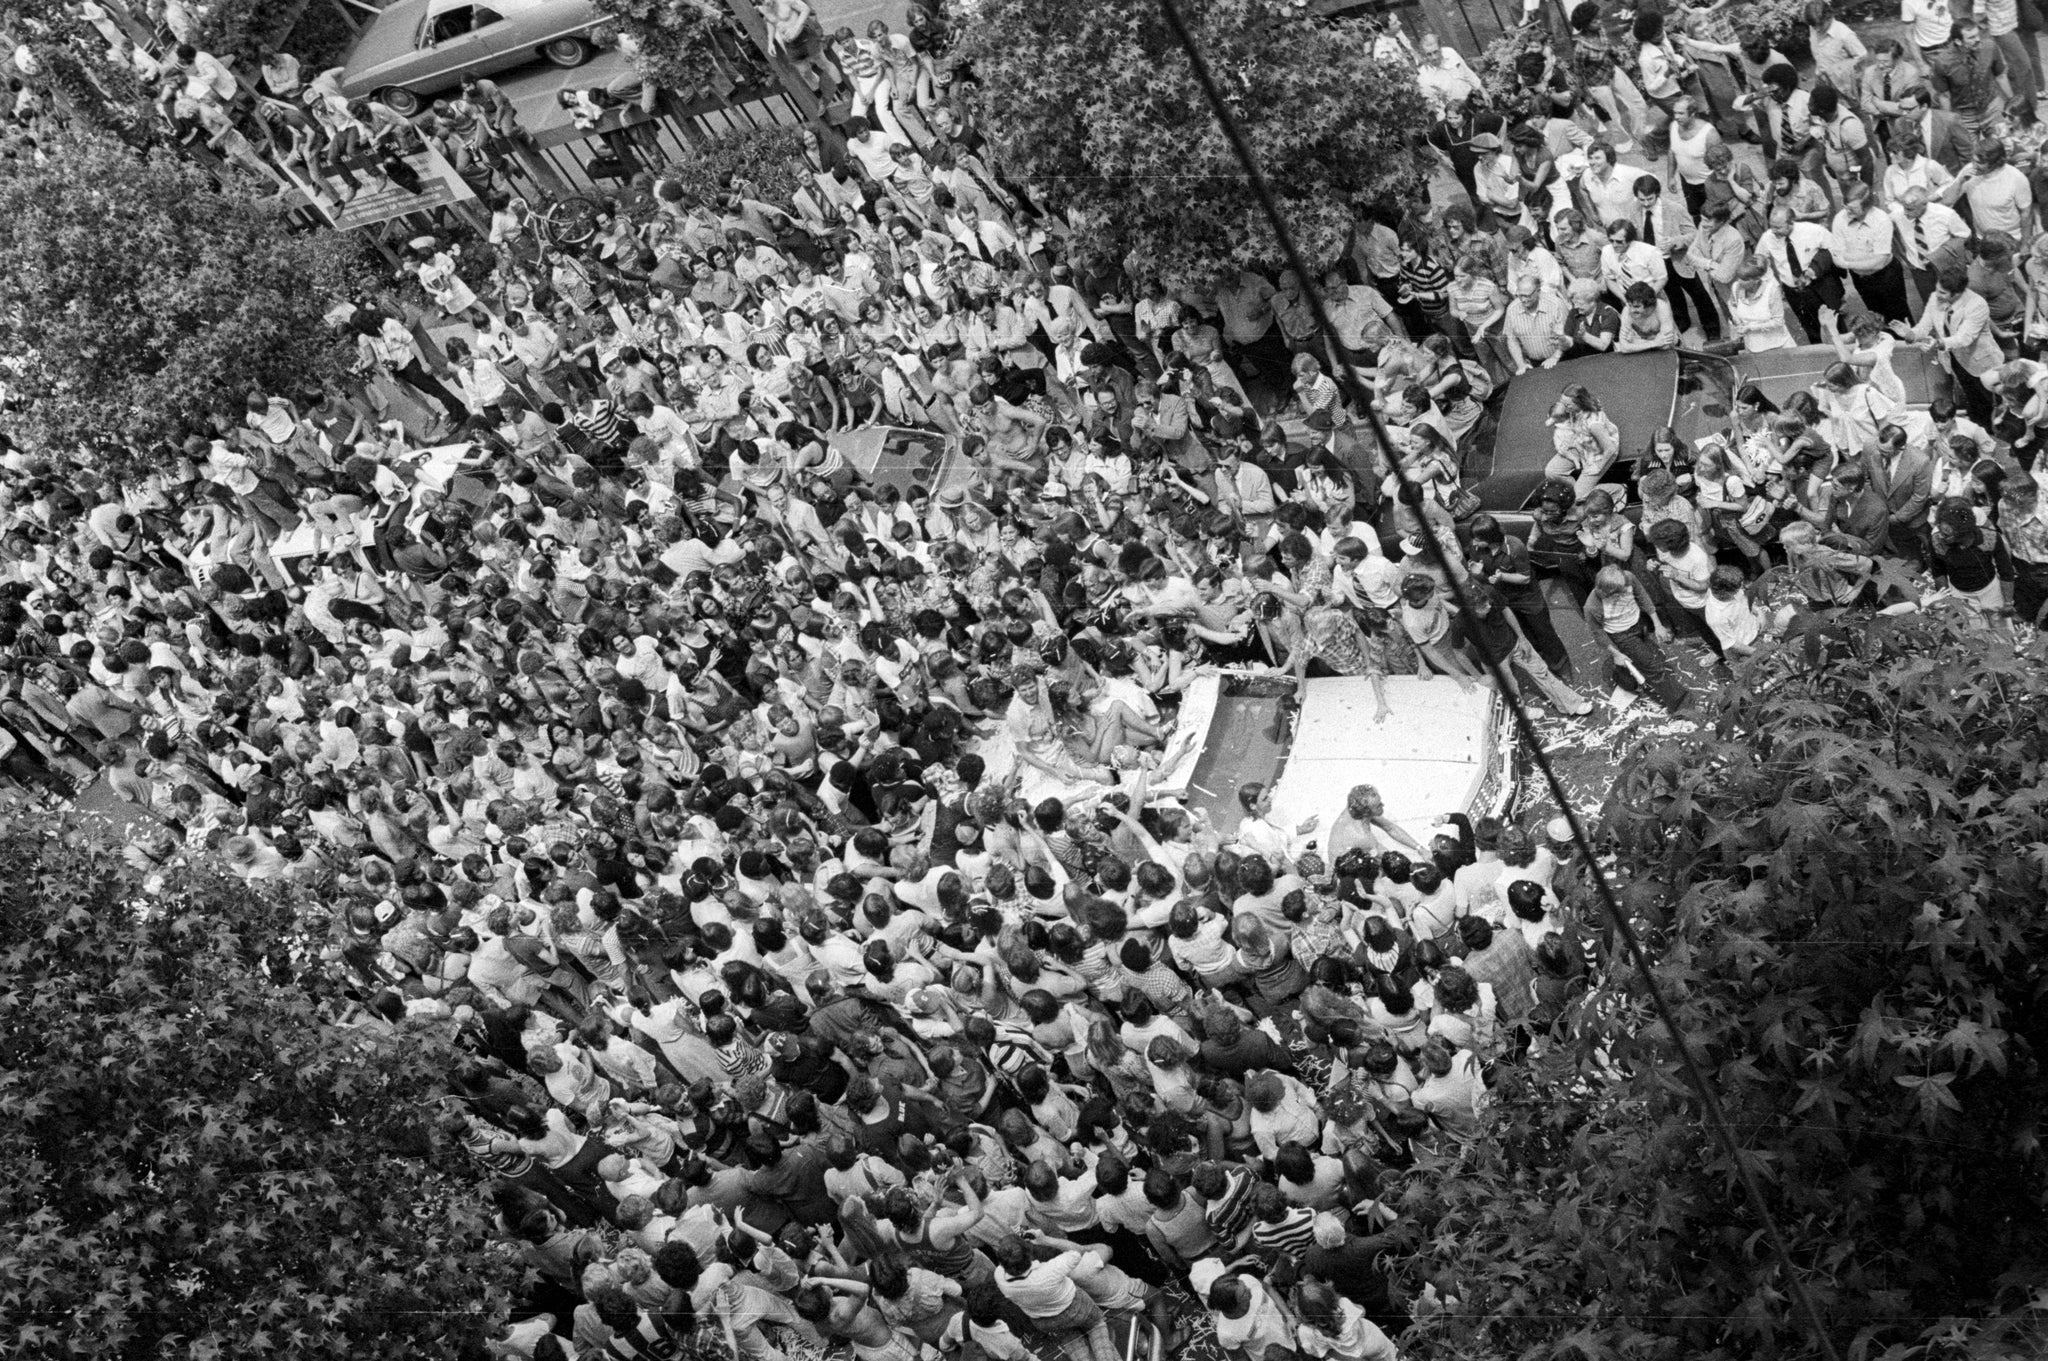 Blazers fans surround the convertible Bill Walton is riding in during the Blazers’ 1977 victory parade. Walton initially tried to ride his bike, but the sea of fans made it impossible. -- ROGER JENSEN / THE OREGONIAN/OREGONLIVE